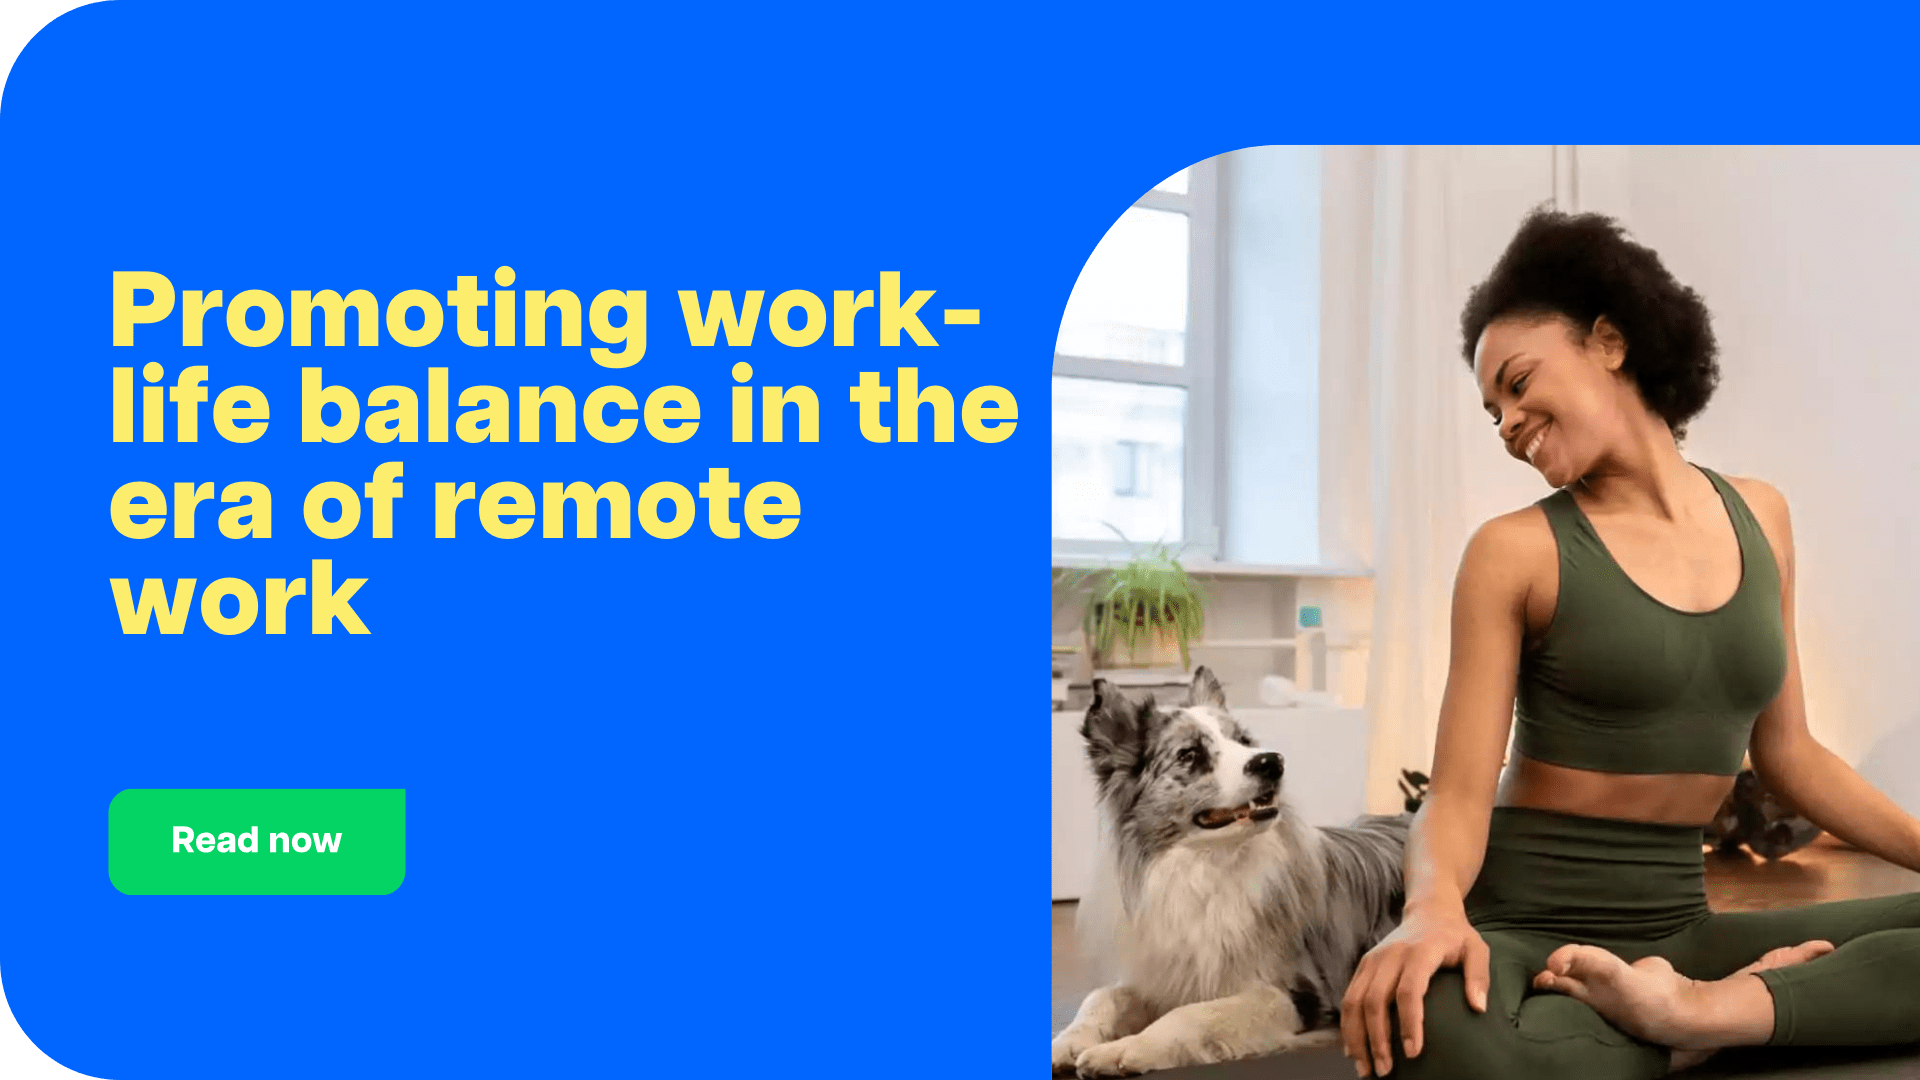 Promoting work-life balance in the era of remote work